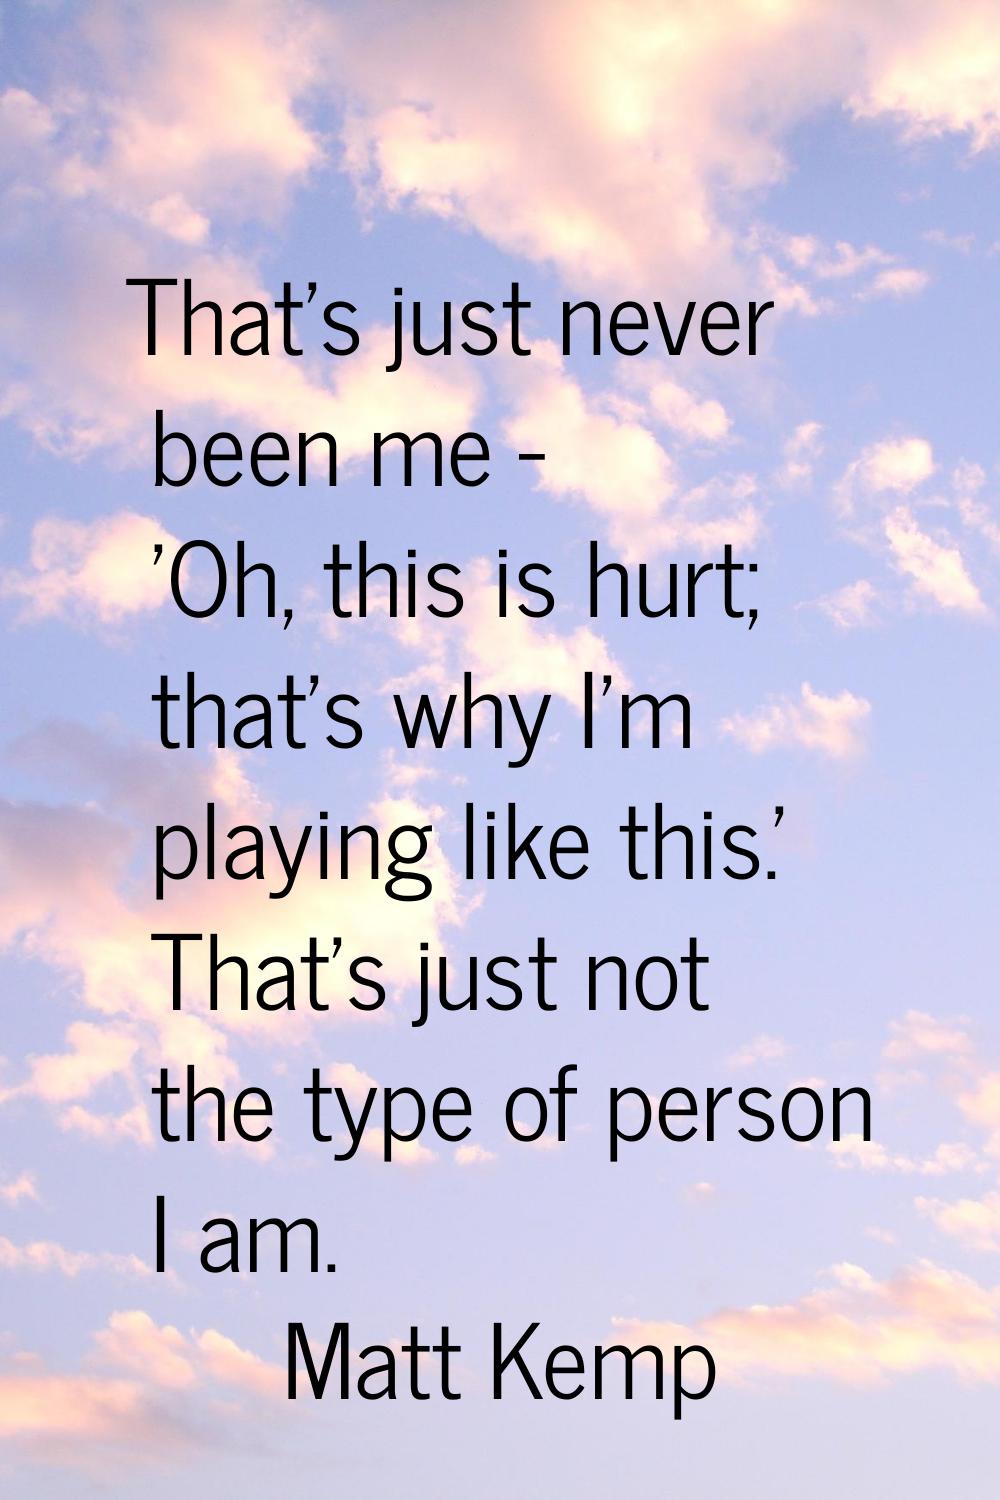 That's just never been me - 'Oh, this is hurt; that's why I'm playing like this.' That's just not t